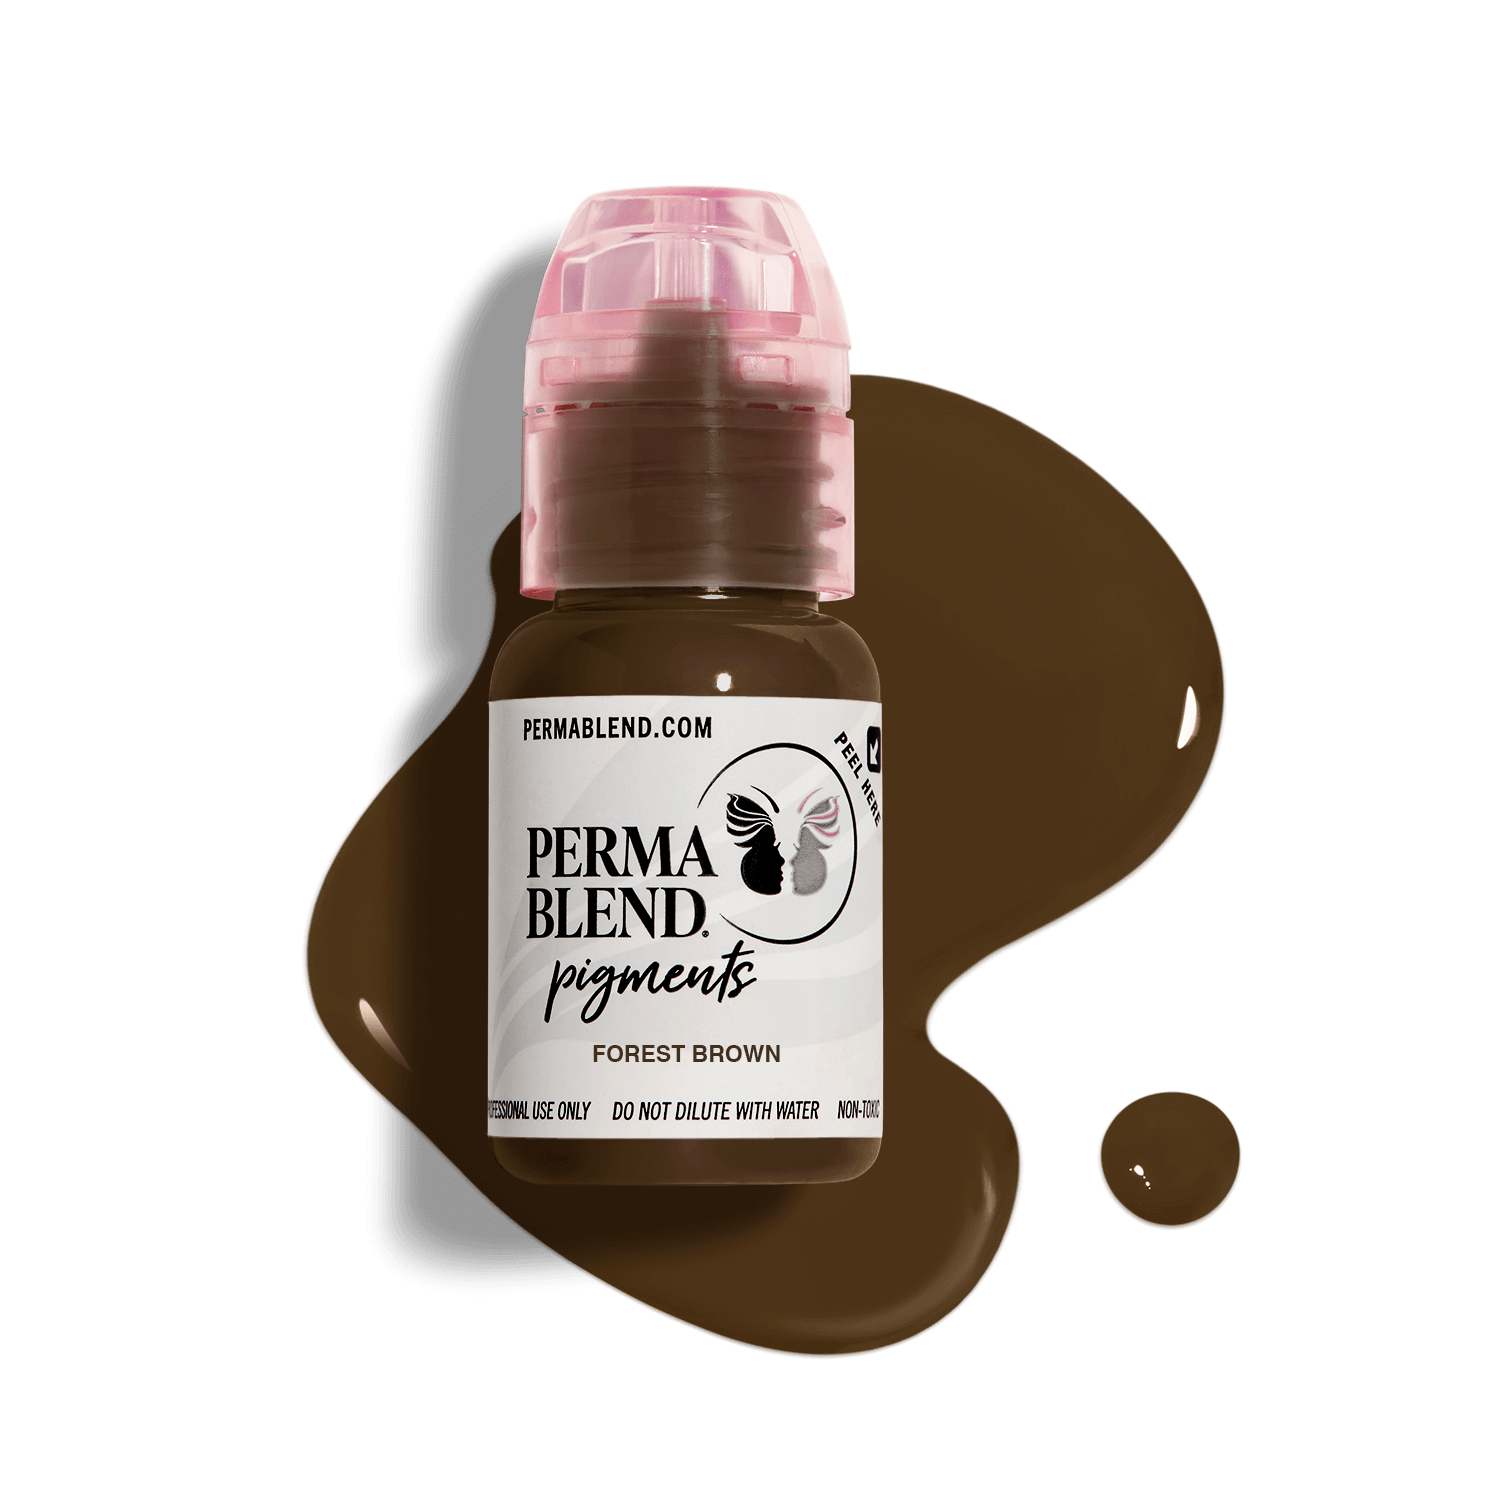 PermaBlend Eyebrow Pigment - Forest Brown